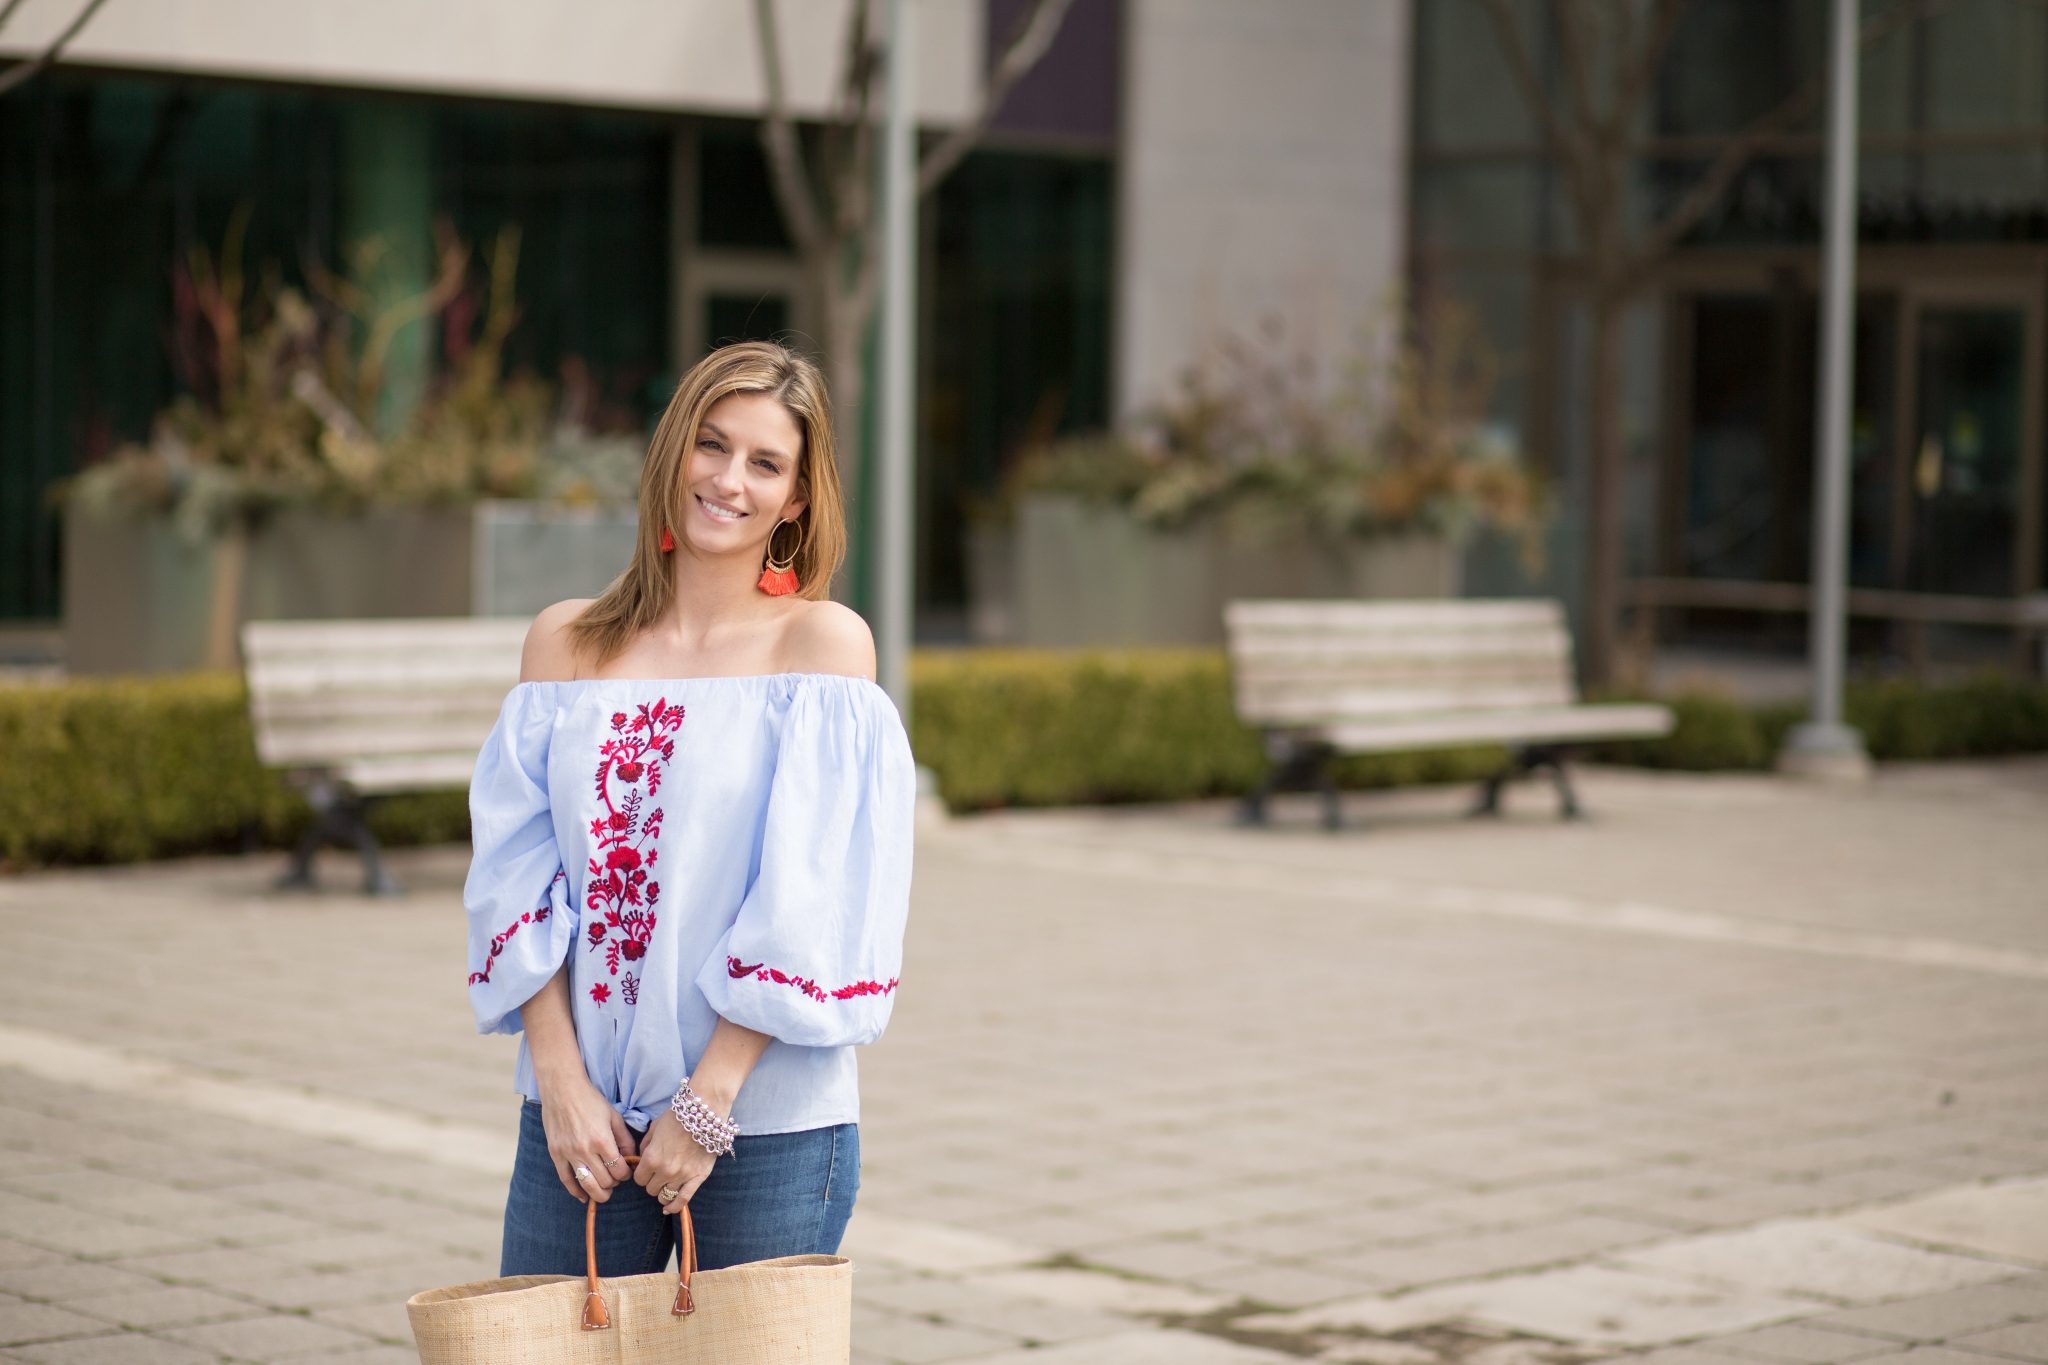 Off the shoulder blue with red embroidery Zara top, J.Brand Skinny jeans, Market bag tote, Valentino velvet rockstud ballerina flats, tassel earrings from H&M